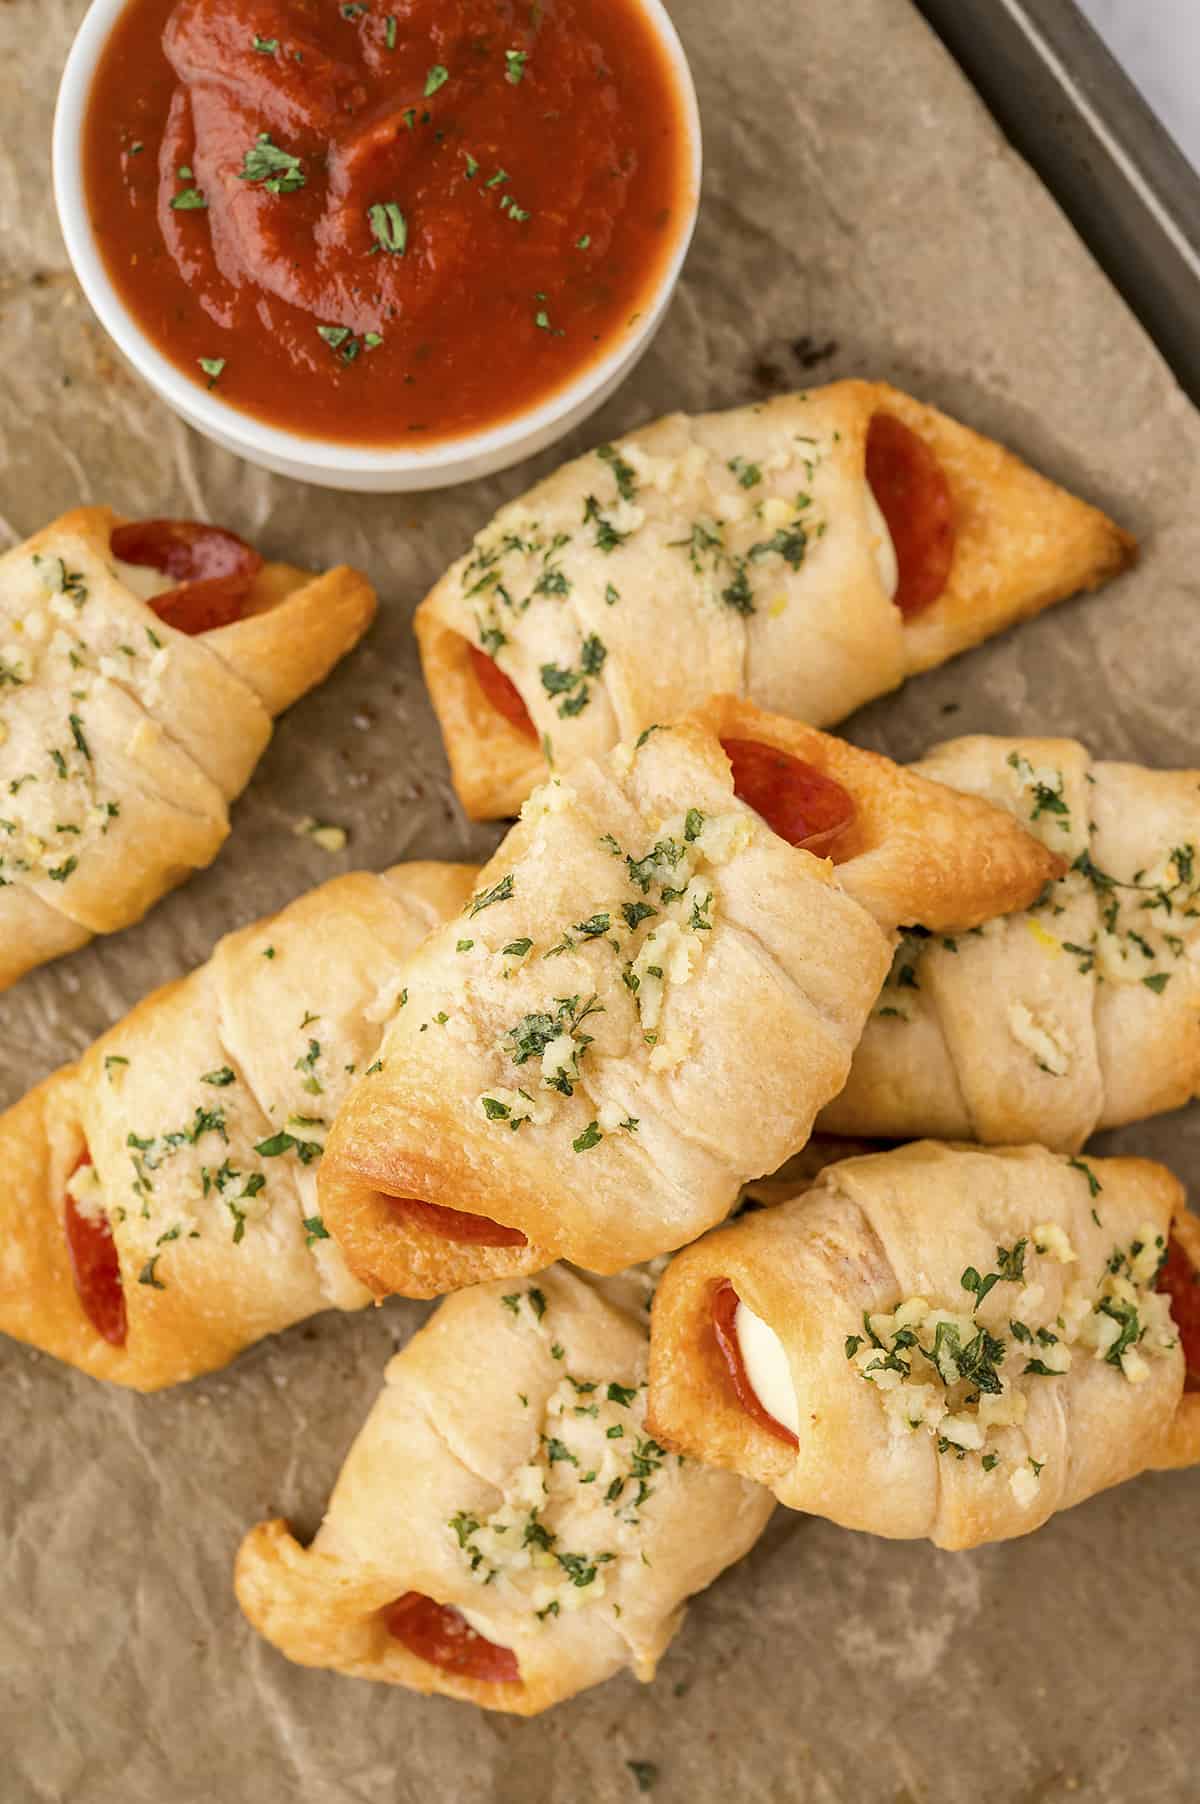 These homemade pizza rolls are stuffed with pepperoni and mozzarella cheese for a quick lunch or easy snack!